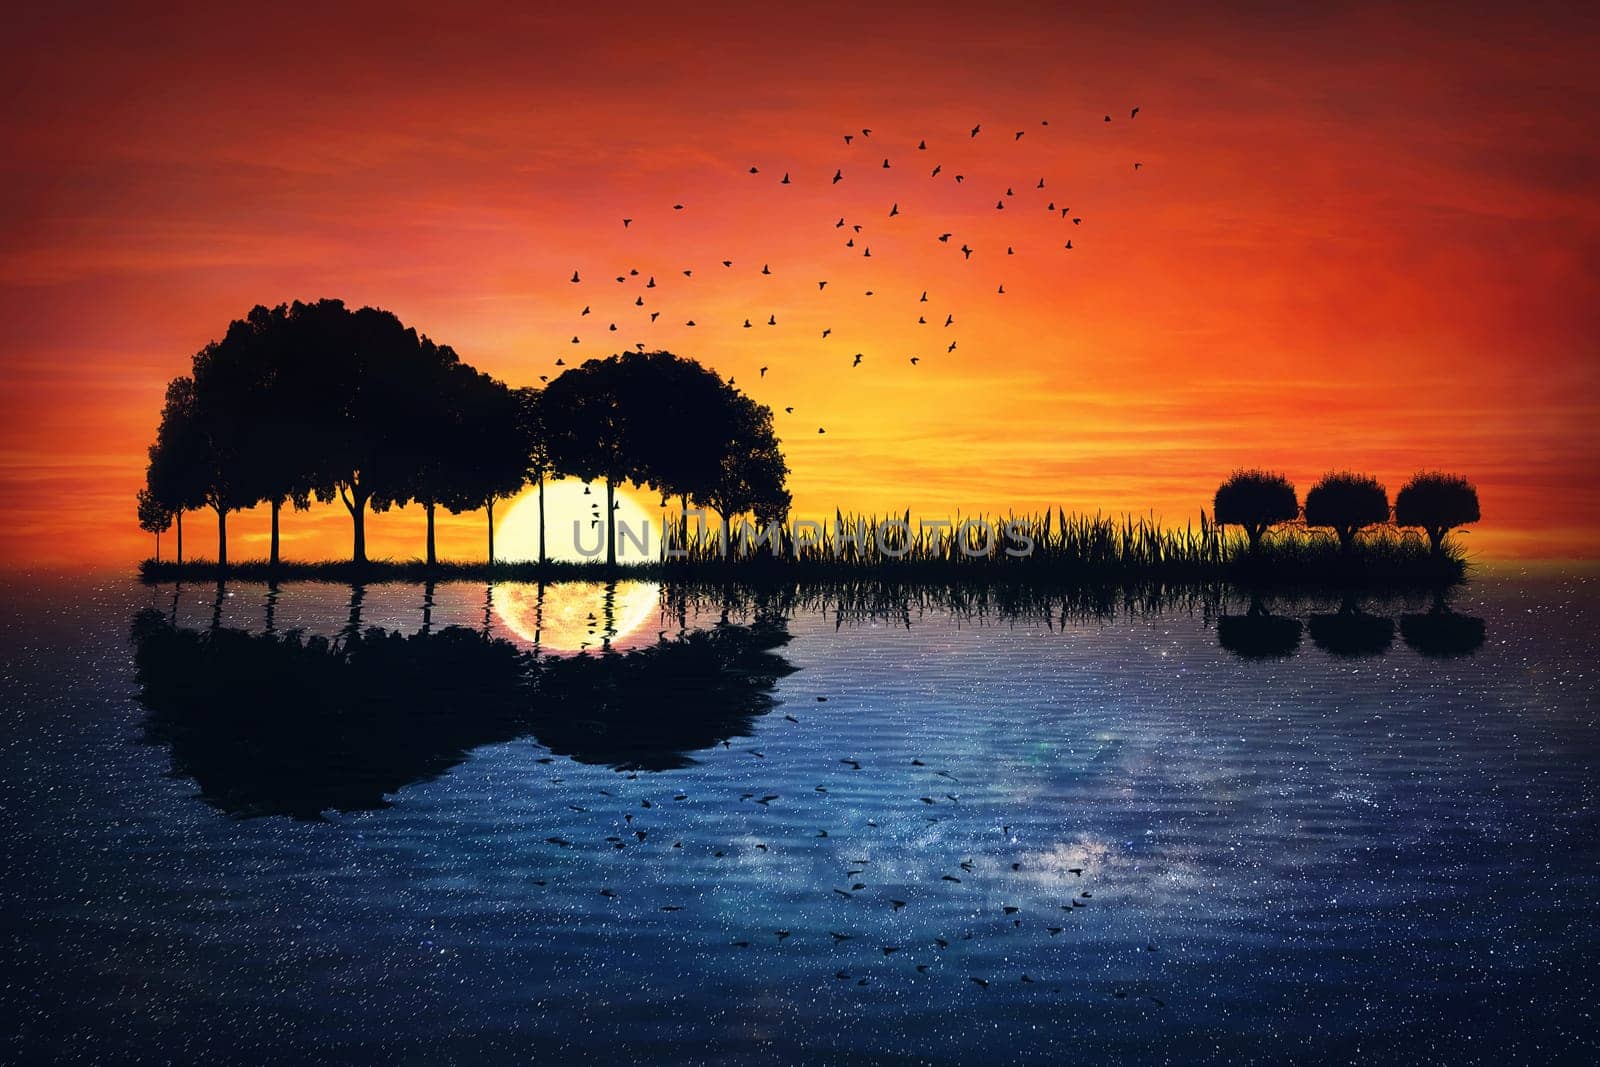 Guitar island surreal seascape, day reflecting into night, sunset against starry sky background. Magical scene with trees on an isle grow in shape of a music instrument with reflection in the water by psychoshadow